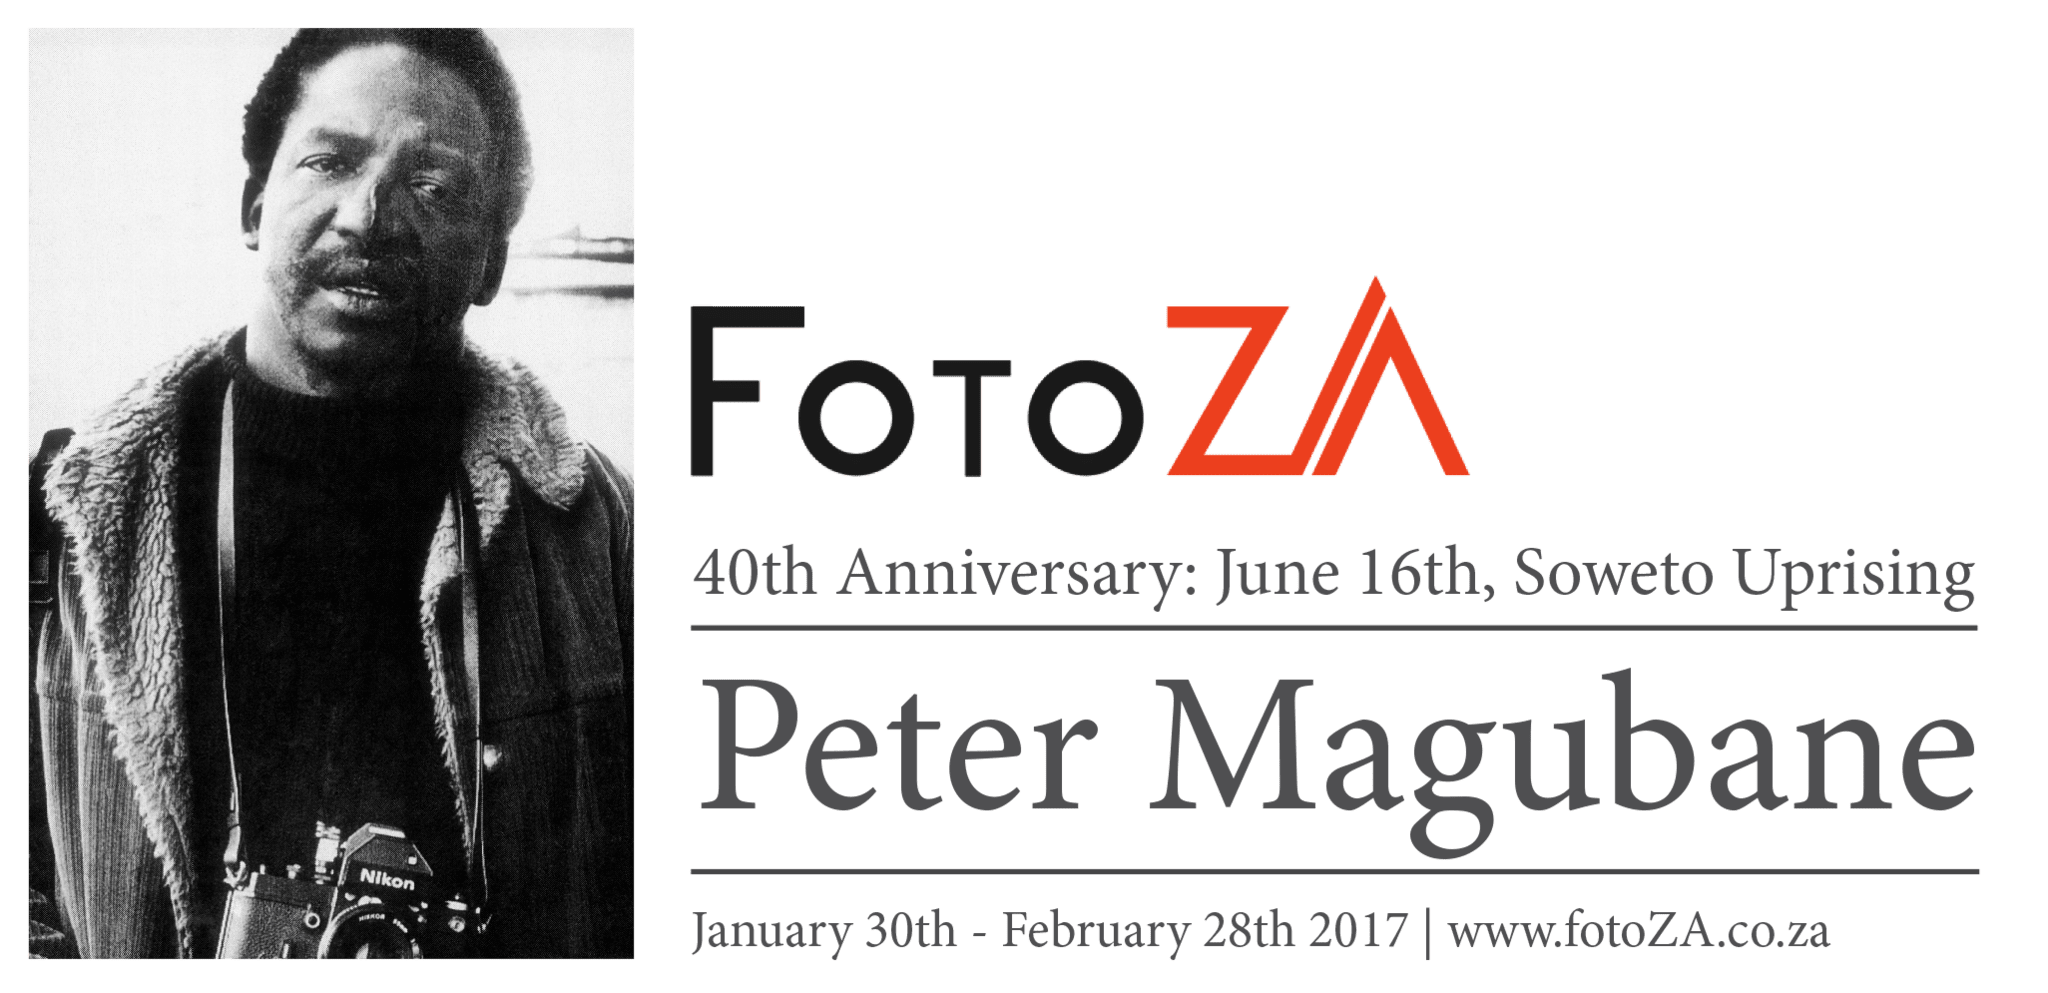 Peter Magubane's June 16th, Soweto Uprising: 40th Anniversary Gallery Exhibition